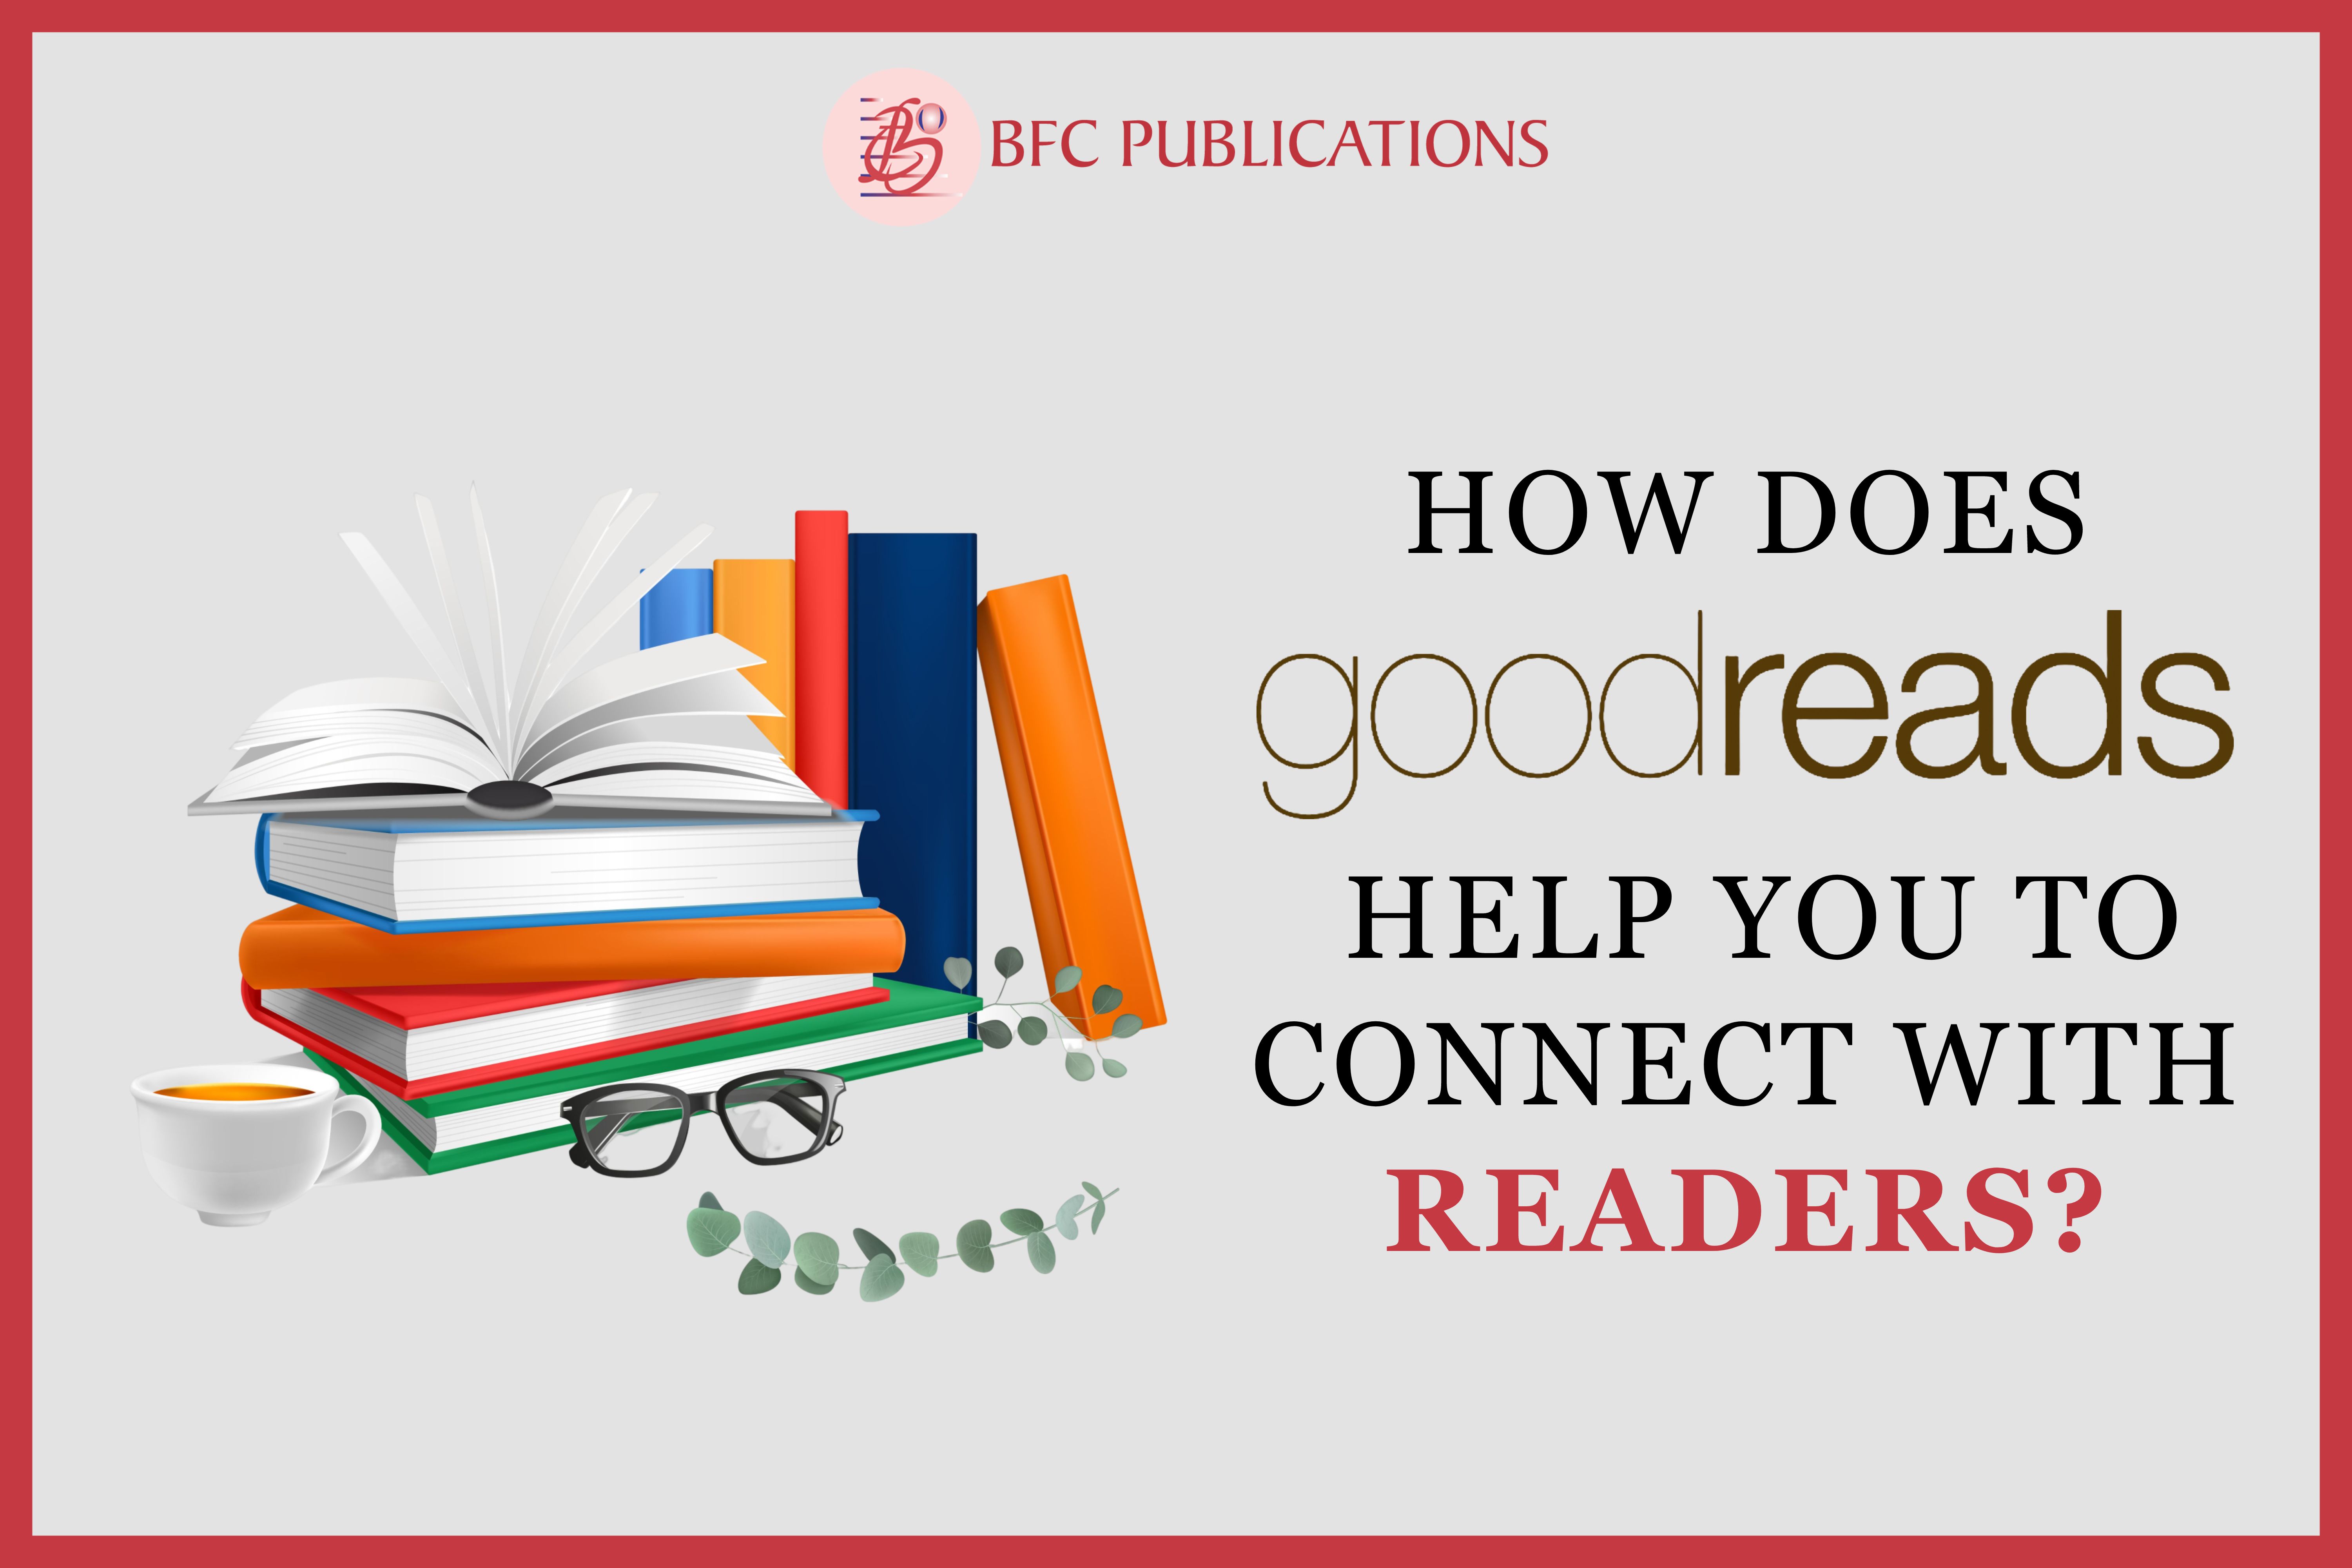 How Does Goodreads Help You to Connect With Readers?